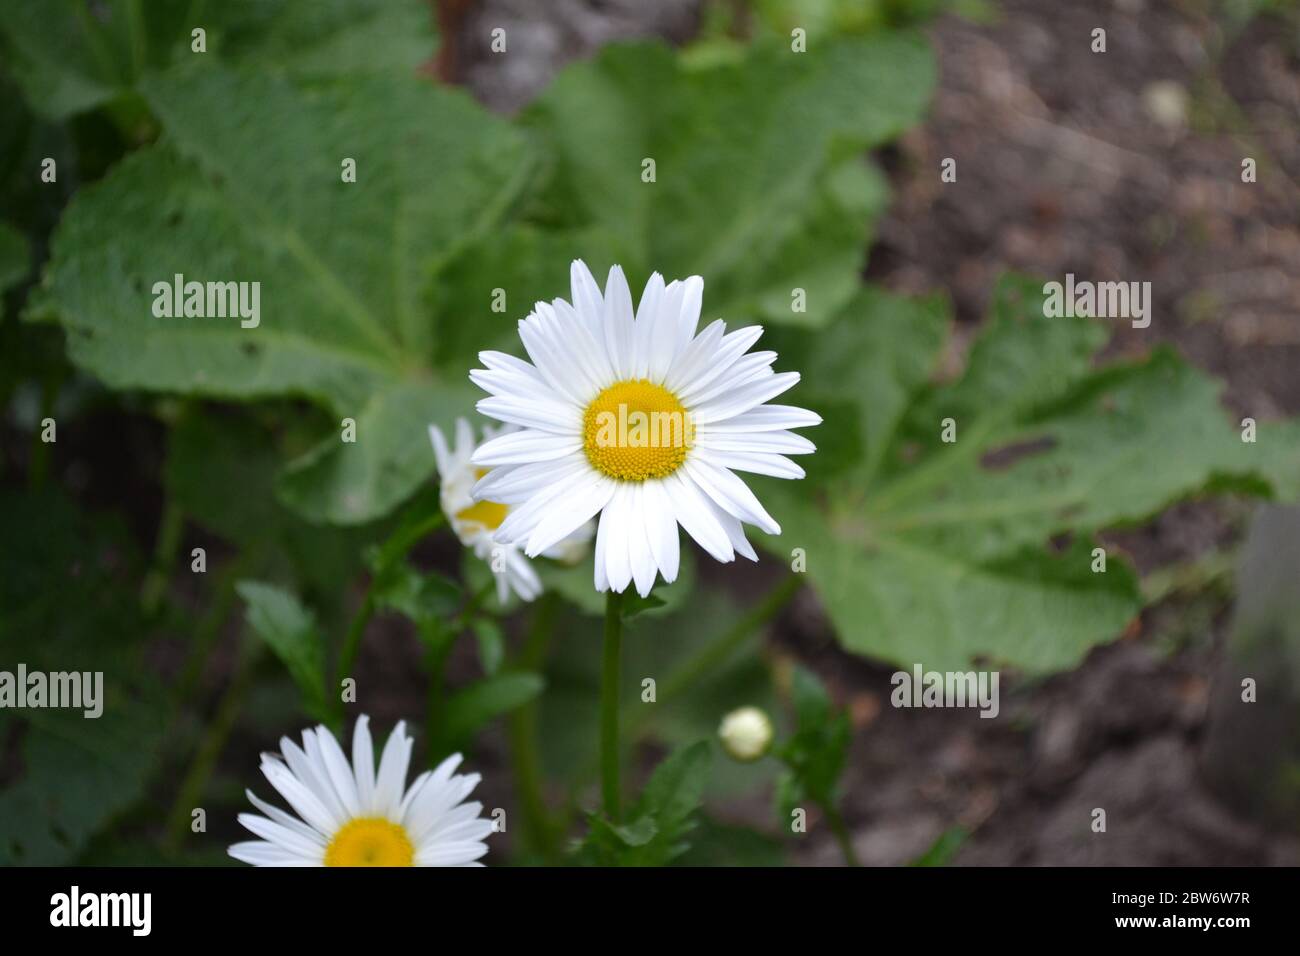 Home garden. Daisy flower, chamomile.  Gardening. Matricaria. Perennial flowering plant of the Asteraceae family. Beautiful, delicate inflorescences. Stock Photo